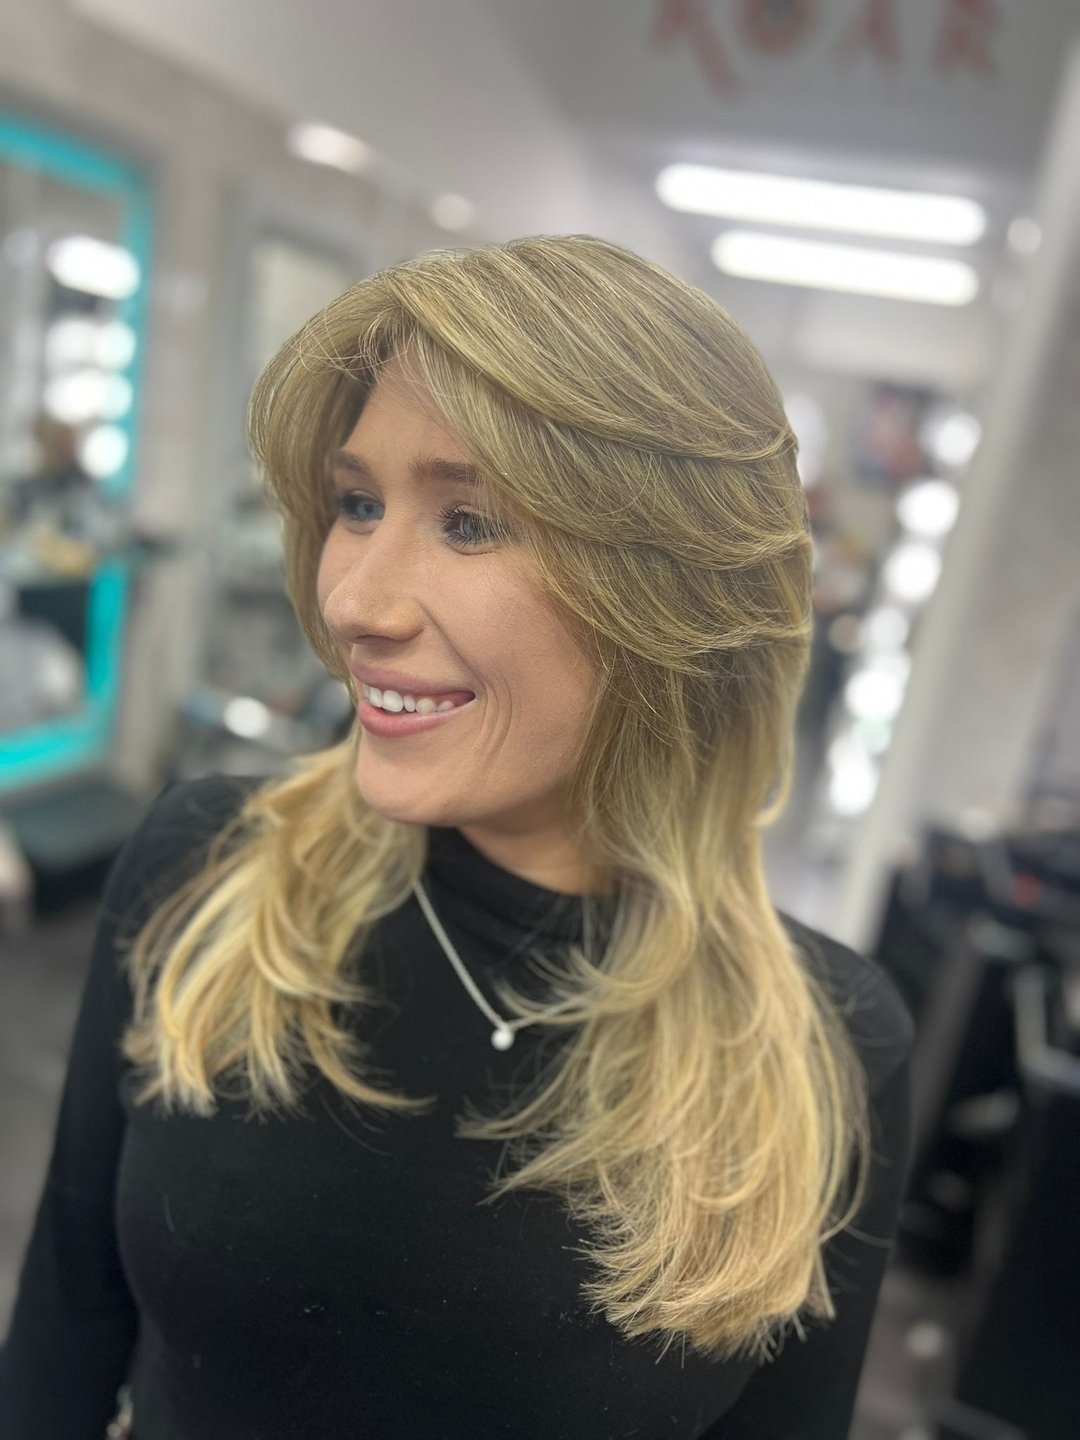 Bangs for days 😍 Just look at those layers, we are absolutely loving this look! 💇🏼&zwj;♀️

This kind of super layered cut is SUCH a trend right now, and we are SO here for it 🙋🏼&zwj;♀️ To join in on the look, book your next appointment now! Just